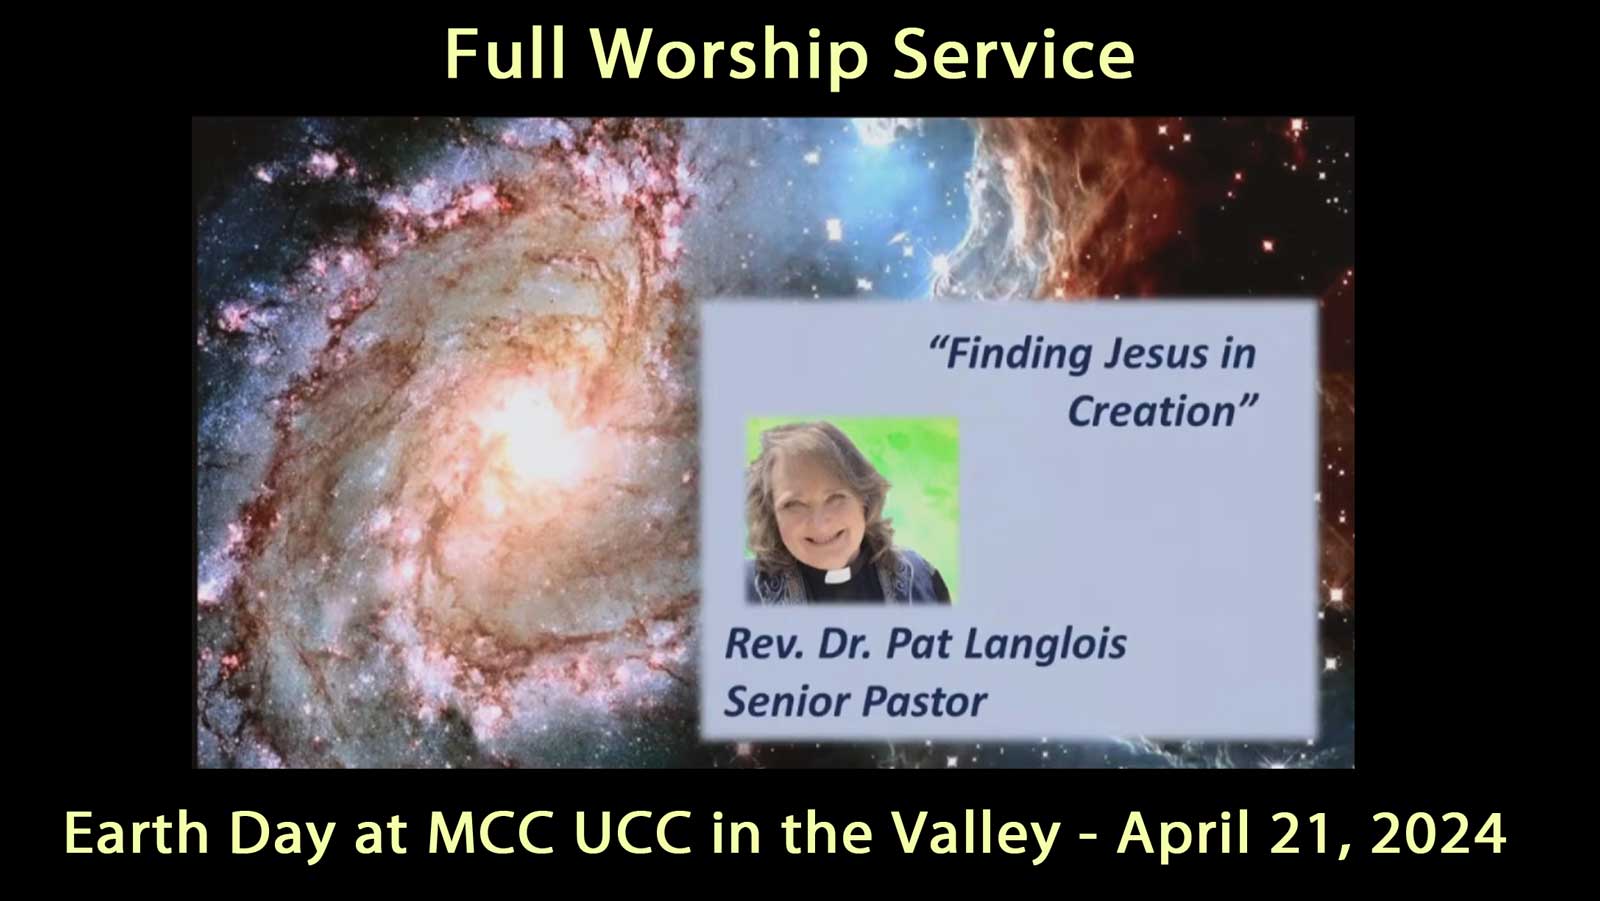 MCC UCC in the Valley Full Worship Service on Earth Day, April 21, 2024 with Rev. Dr. Pat Langlois